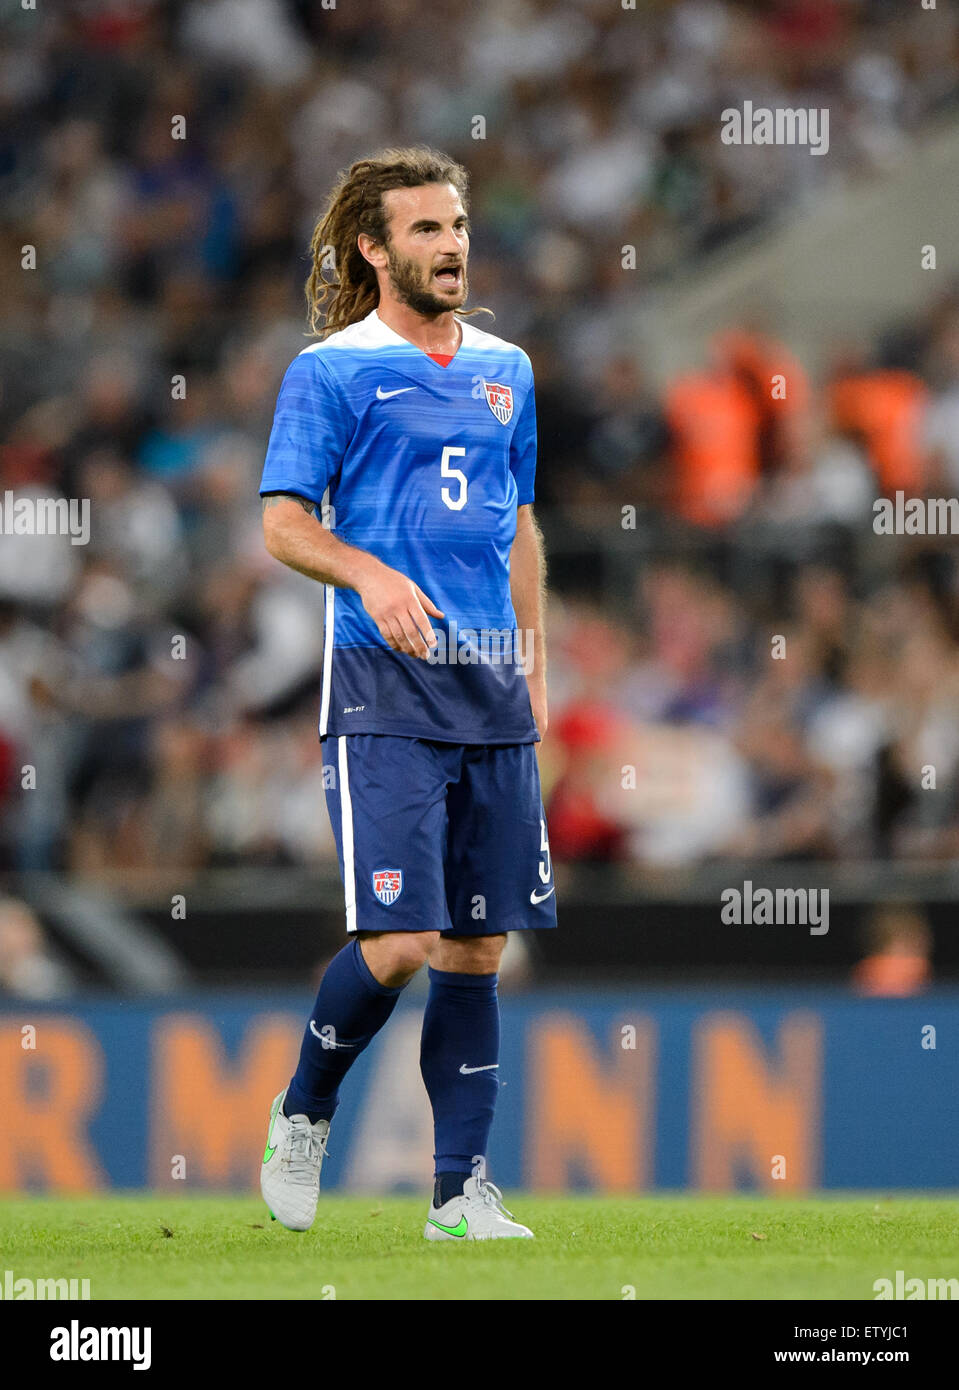 Cologne, Germany. 10th June, 2015. Kyle Beckerman of the USA reacts during the international friendly soccer match between Germany and the USA at RheinEnergieStadion in Cologne, Germany, 10 June 2015. The USA won the match 2-1. Photo: Thomas Eisenhuth/dpa - NO WIRE SERVICE -/dpa/Alamy Live News Stock Photo